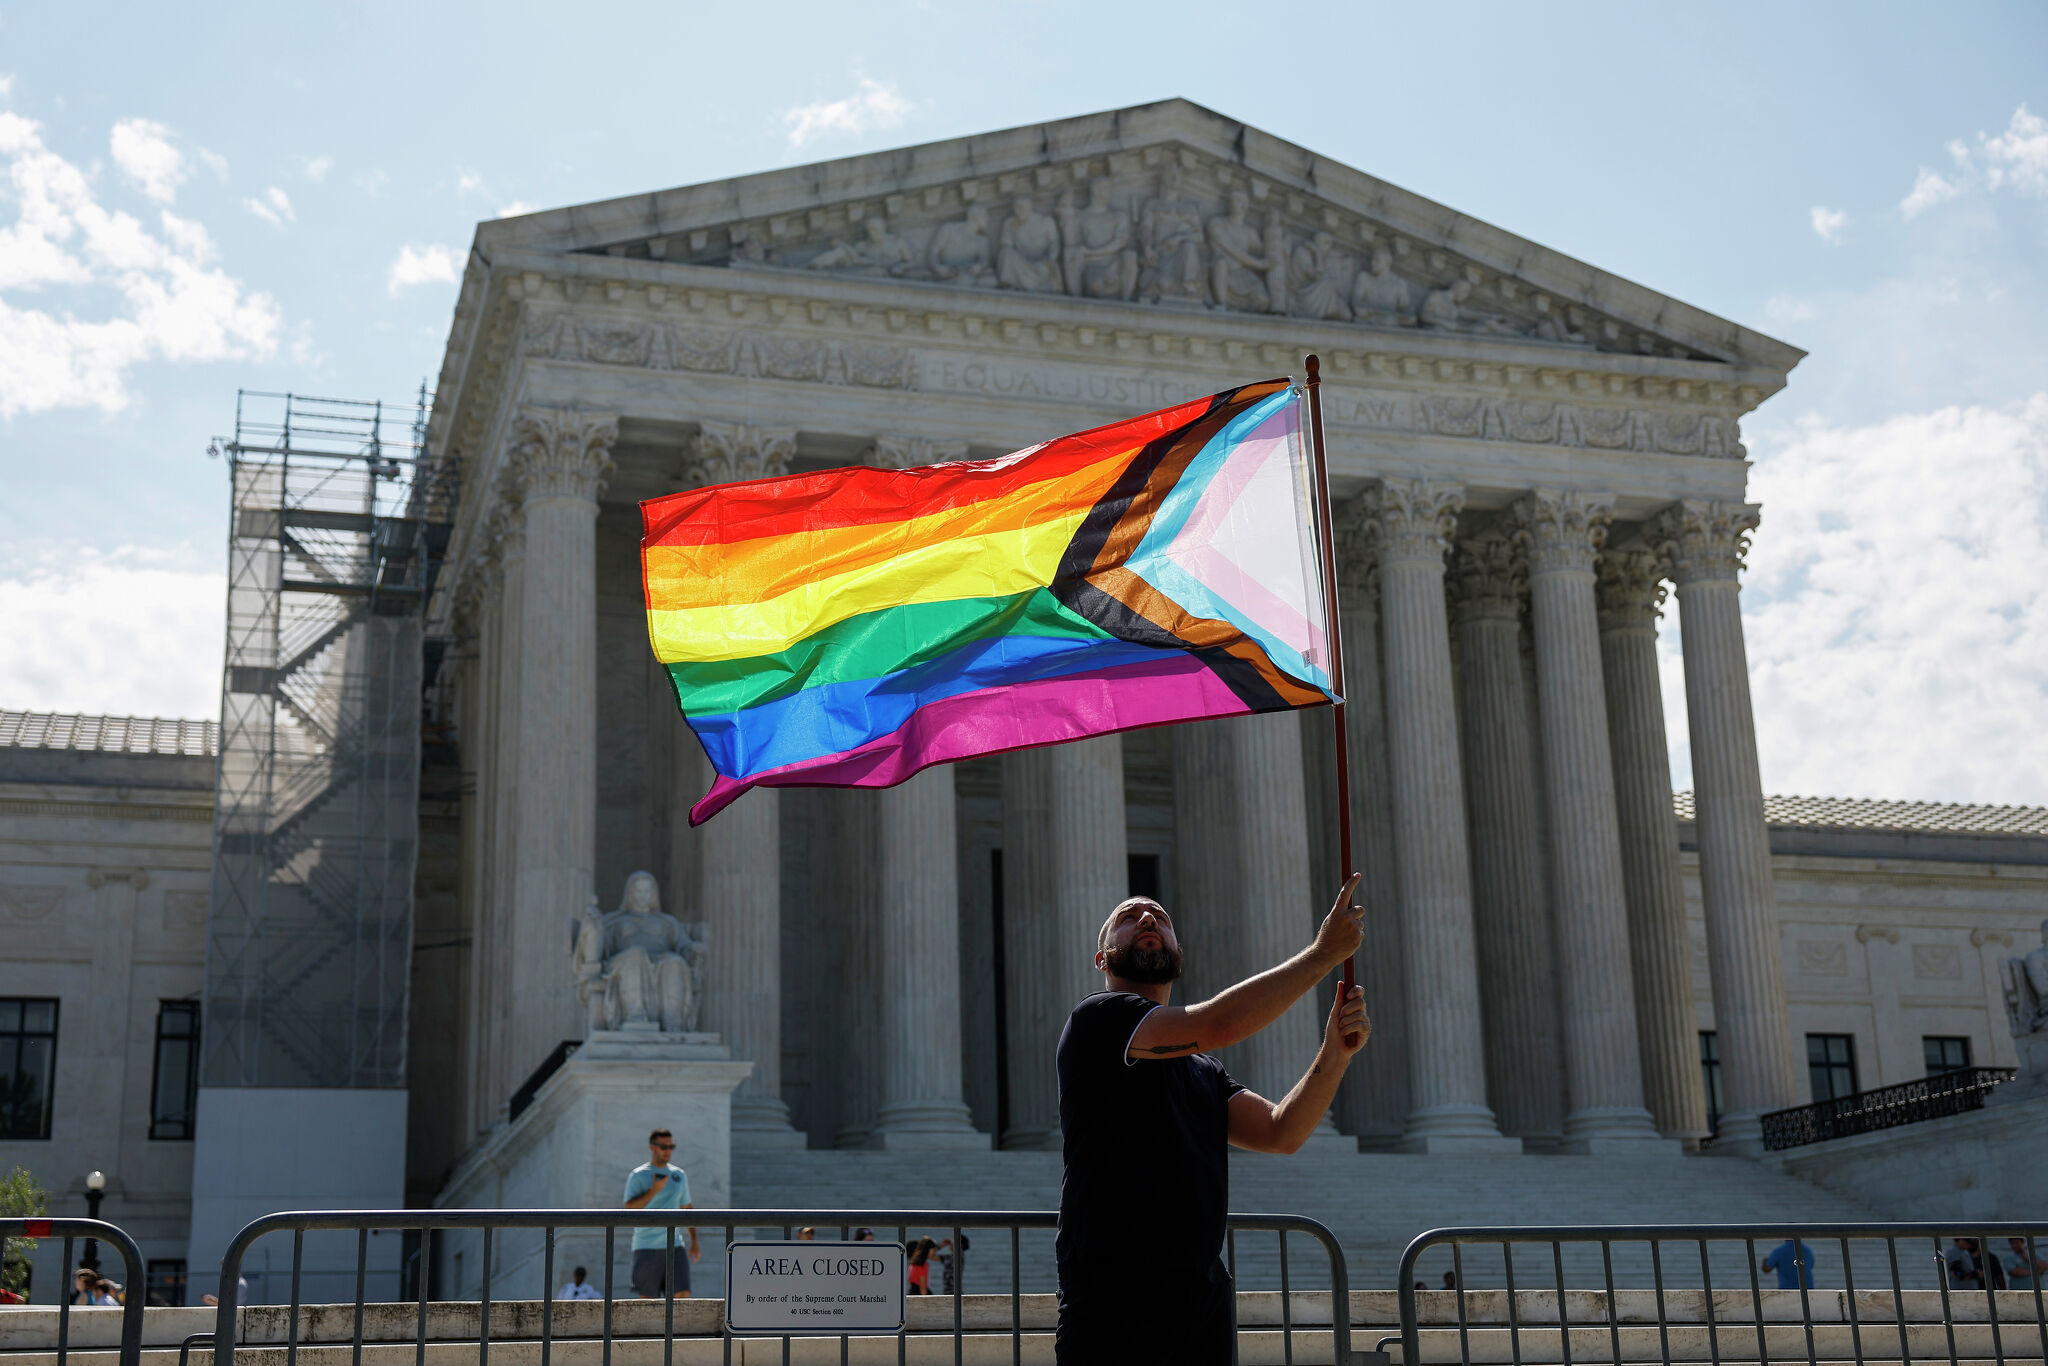 Decision makes it clear: The court seeks to overturn gay marriage